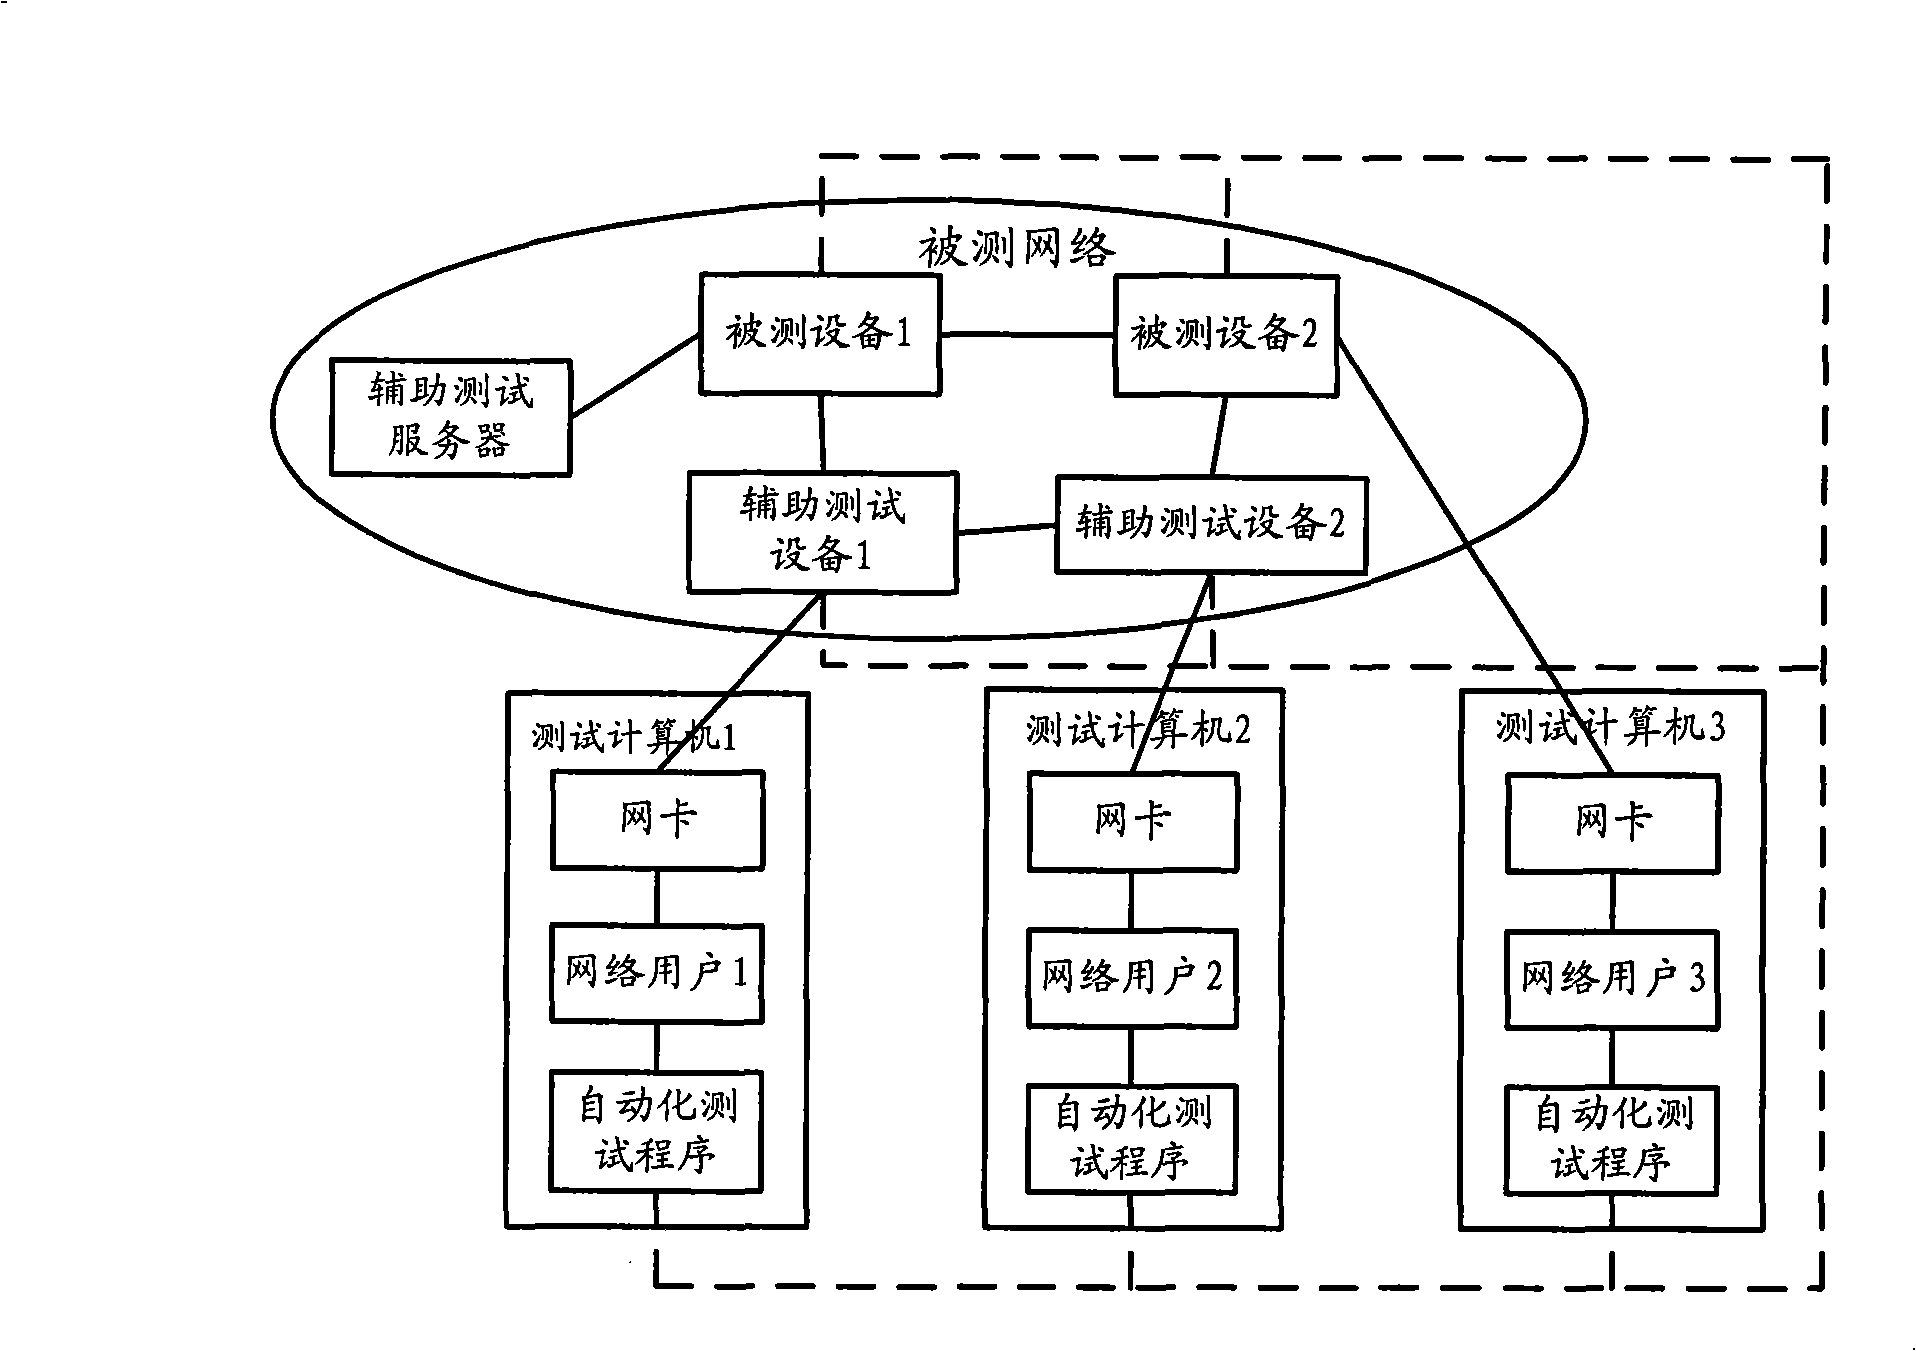 Network testing method and device